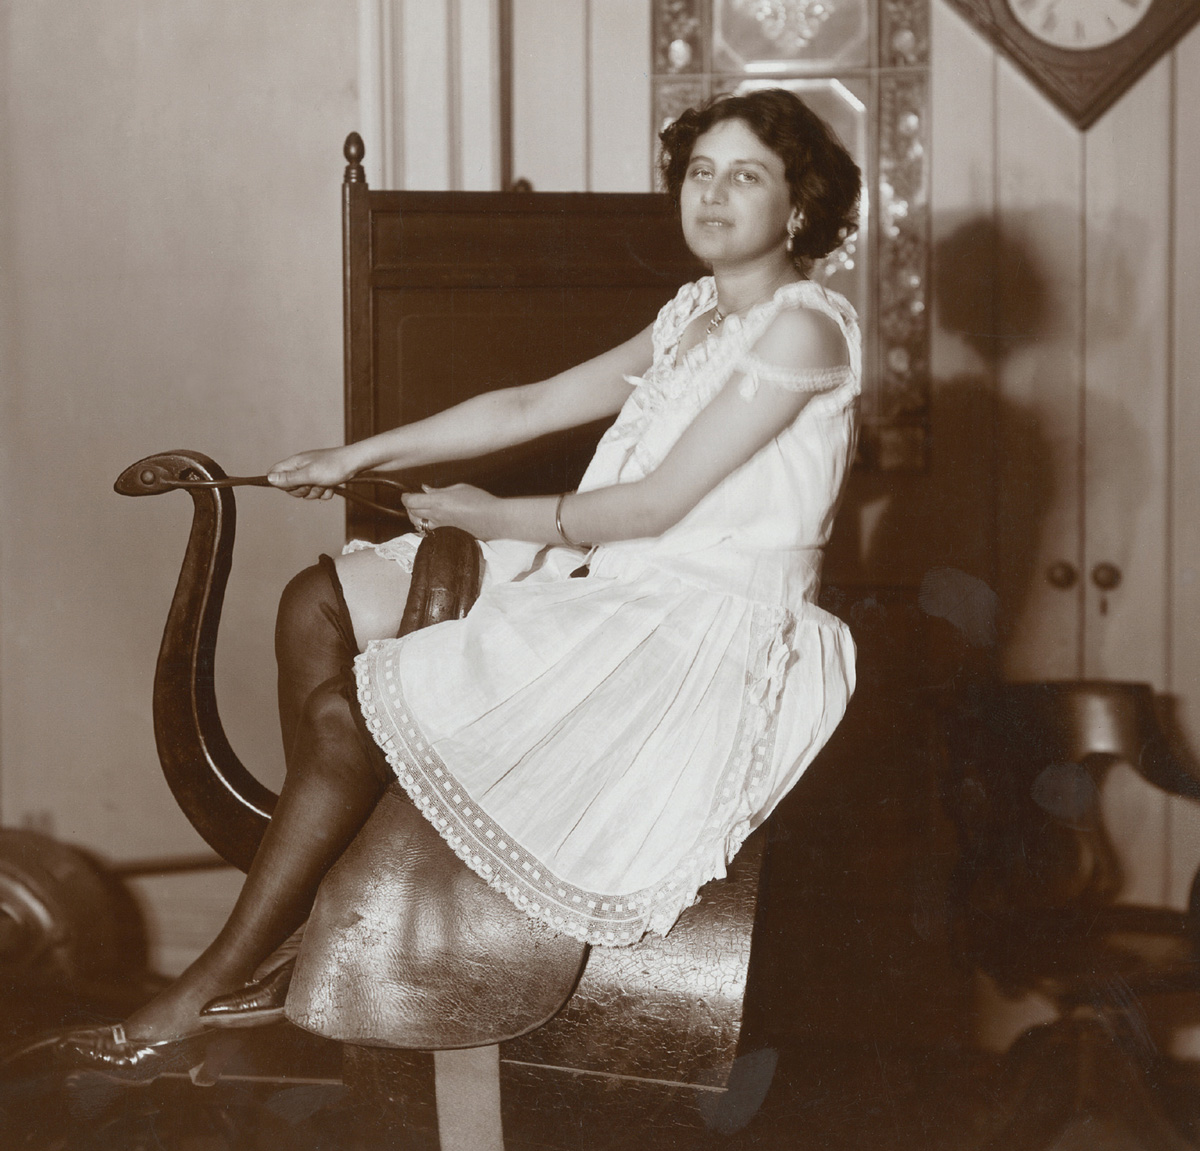 A woman poses on a horse riding simulator at the Zander Institute in New York, 1908. Courtesy Museum of the City of New York.